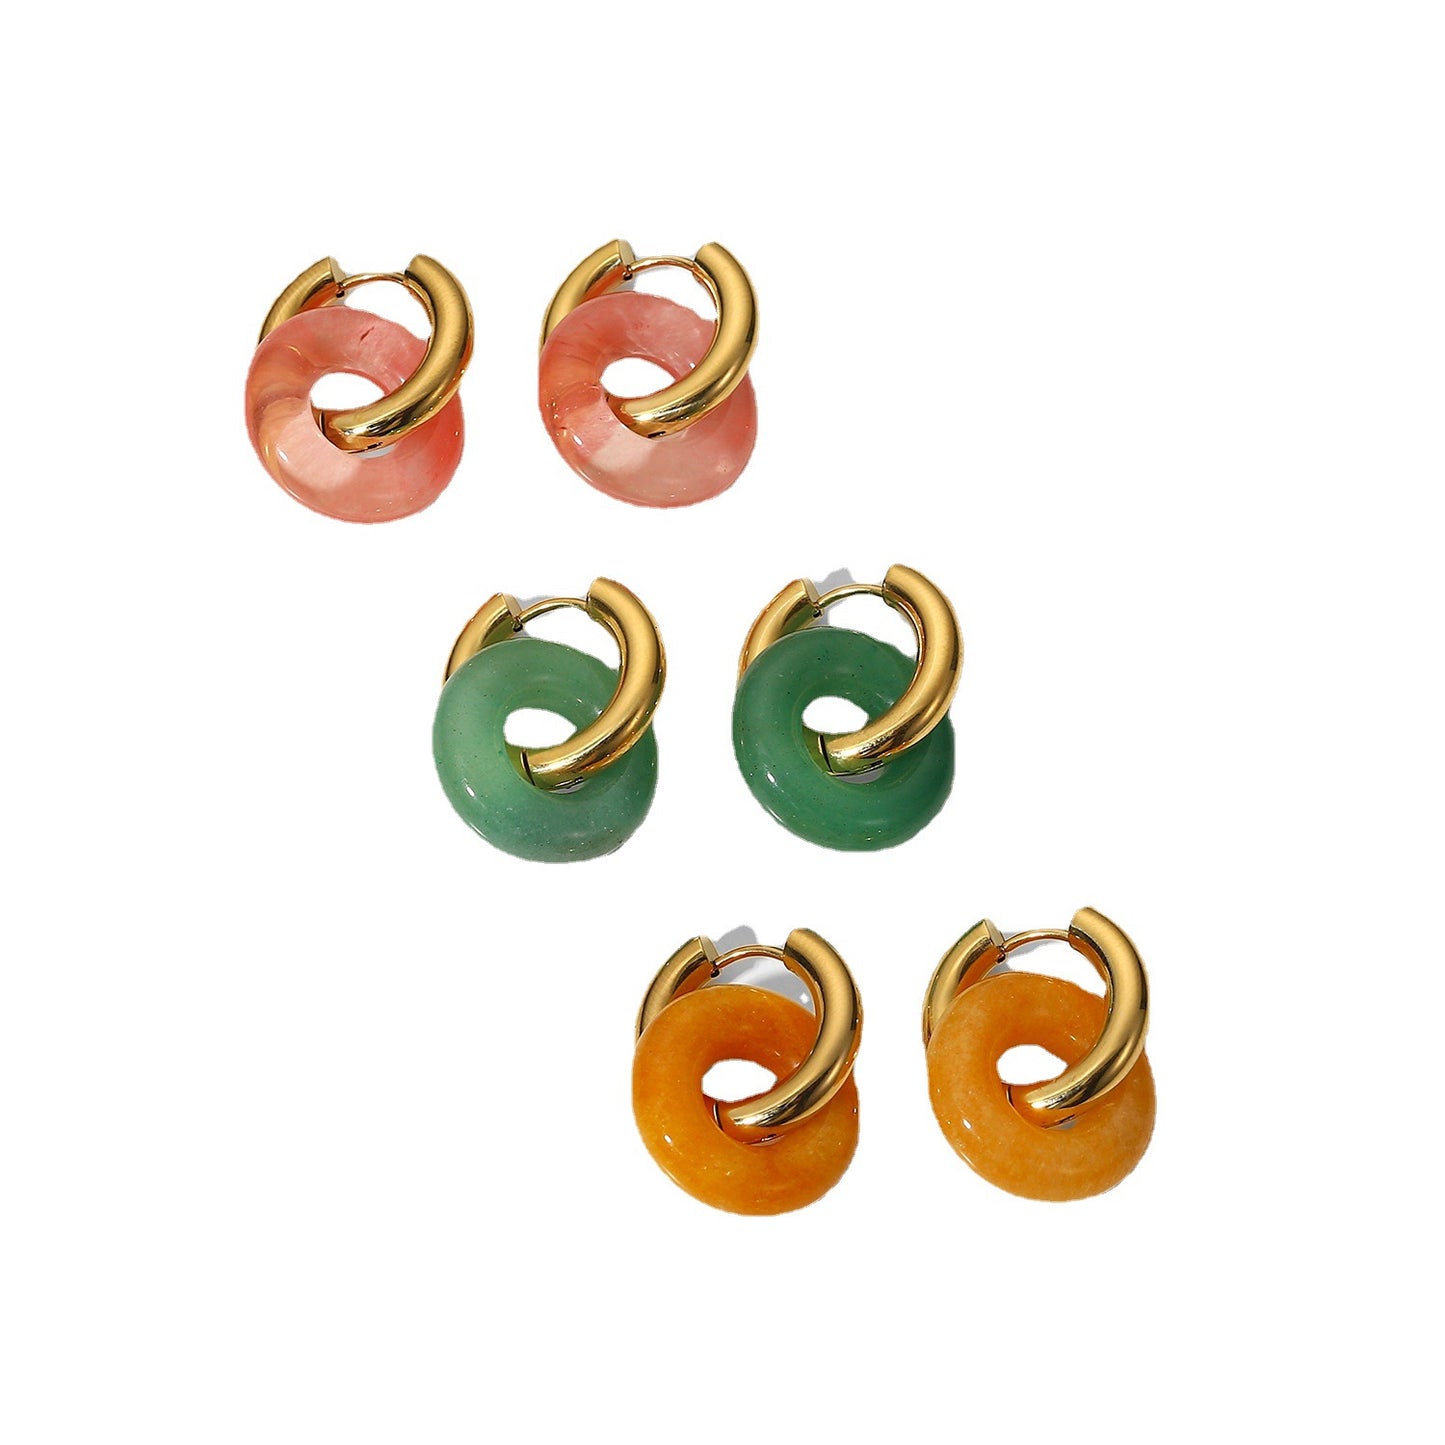 5pcs New Fashion Vintage Natural Stone Ring Earrings 14K Gold Plated Stainless Steel Earrings Style Earrings For Women